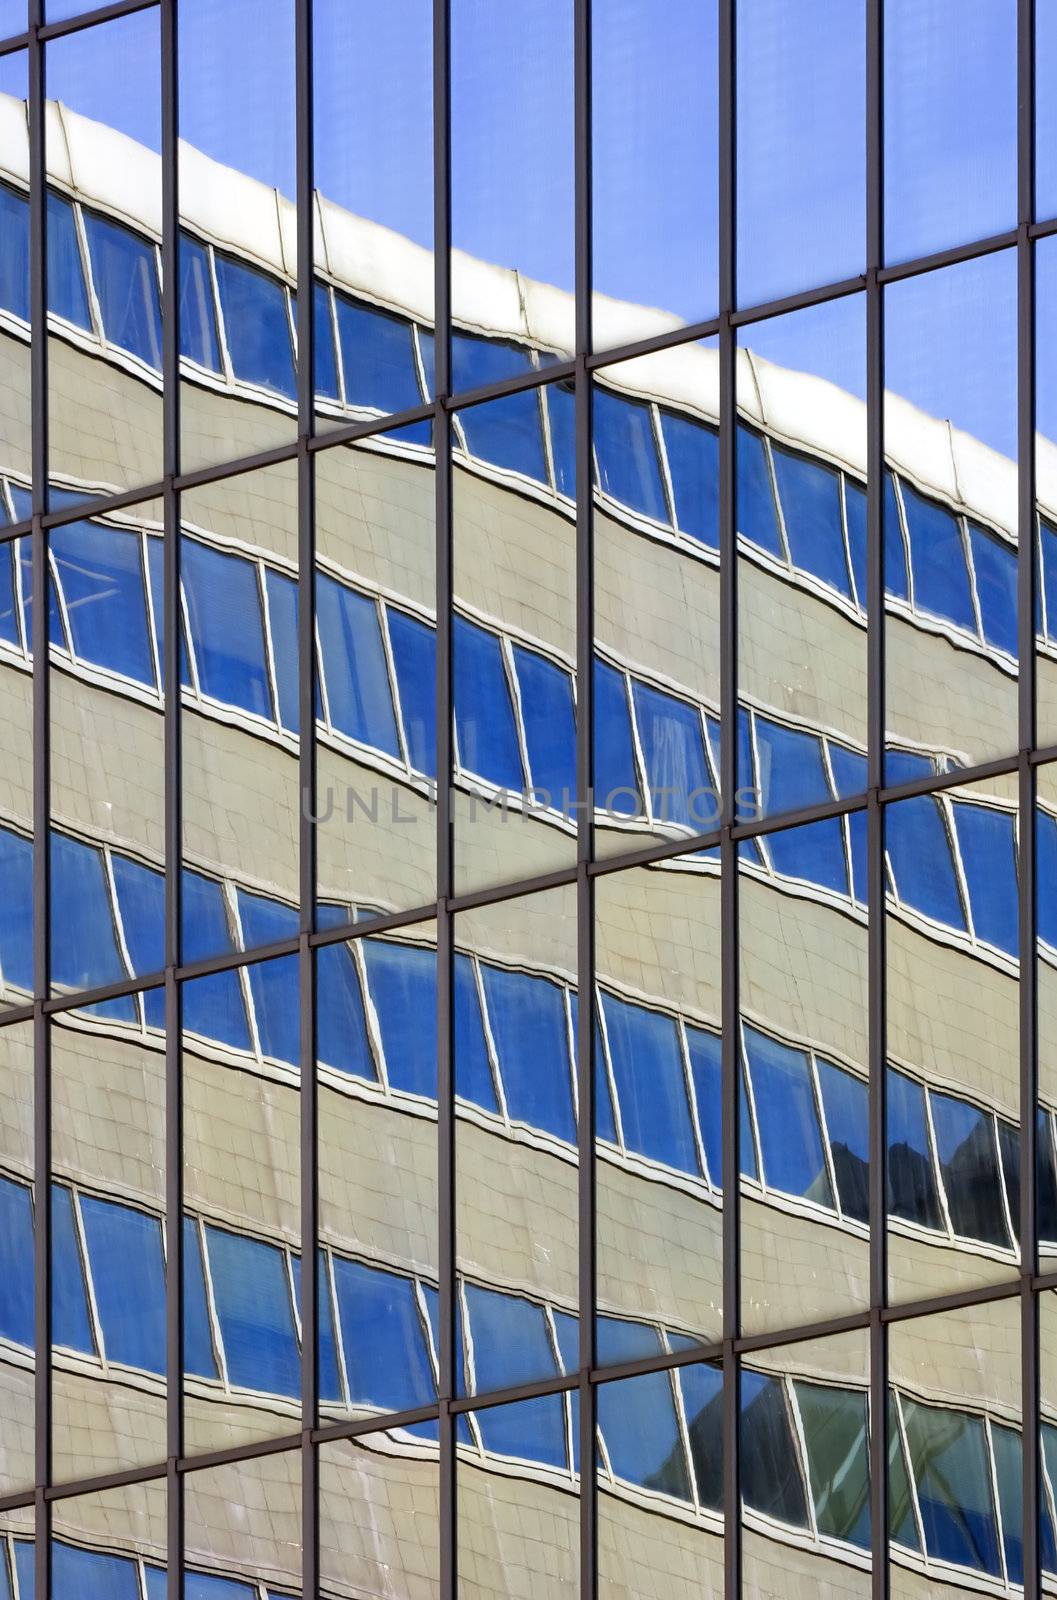 sky and building reflected in the glasses of another building